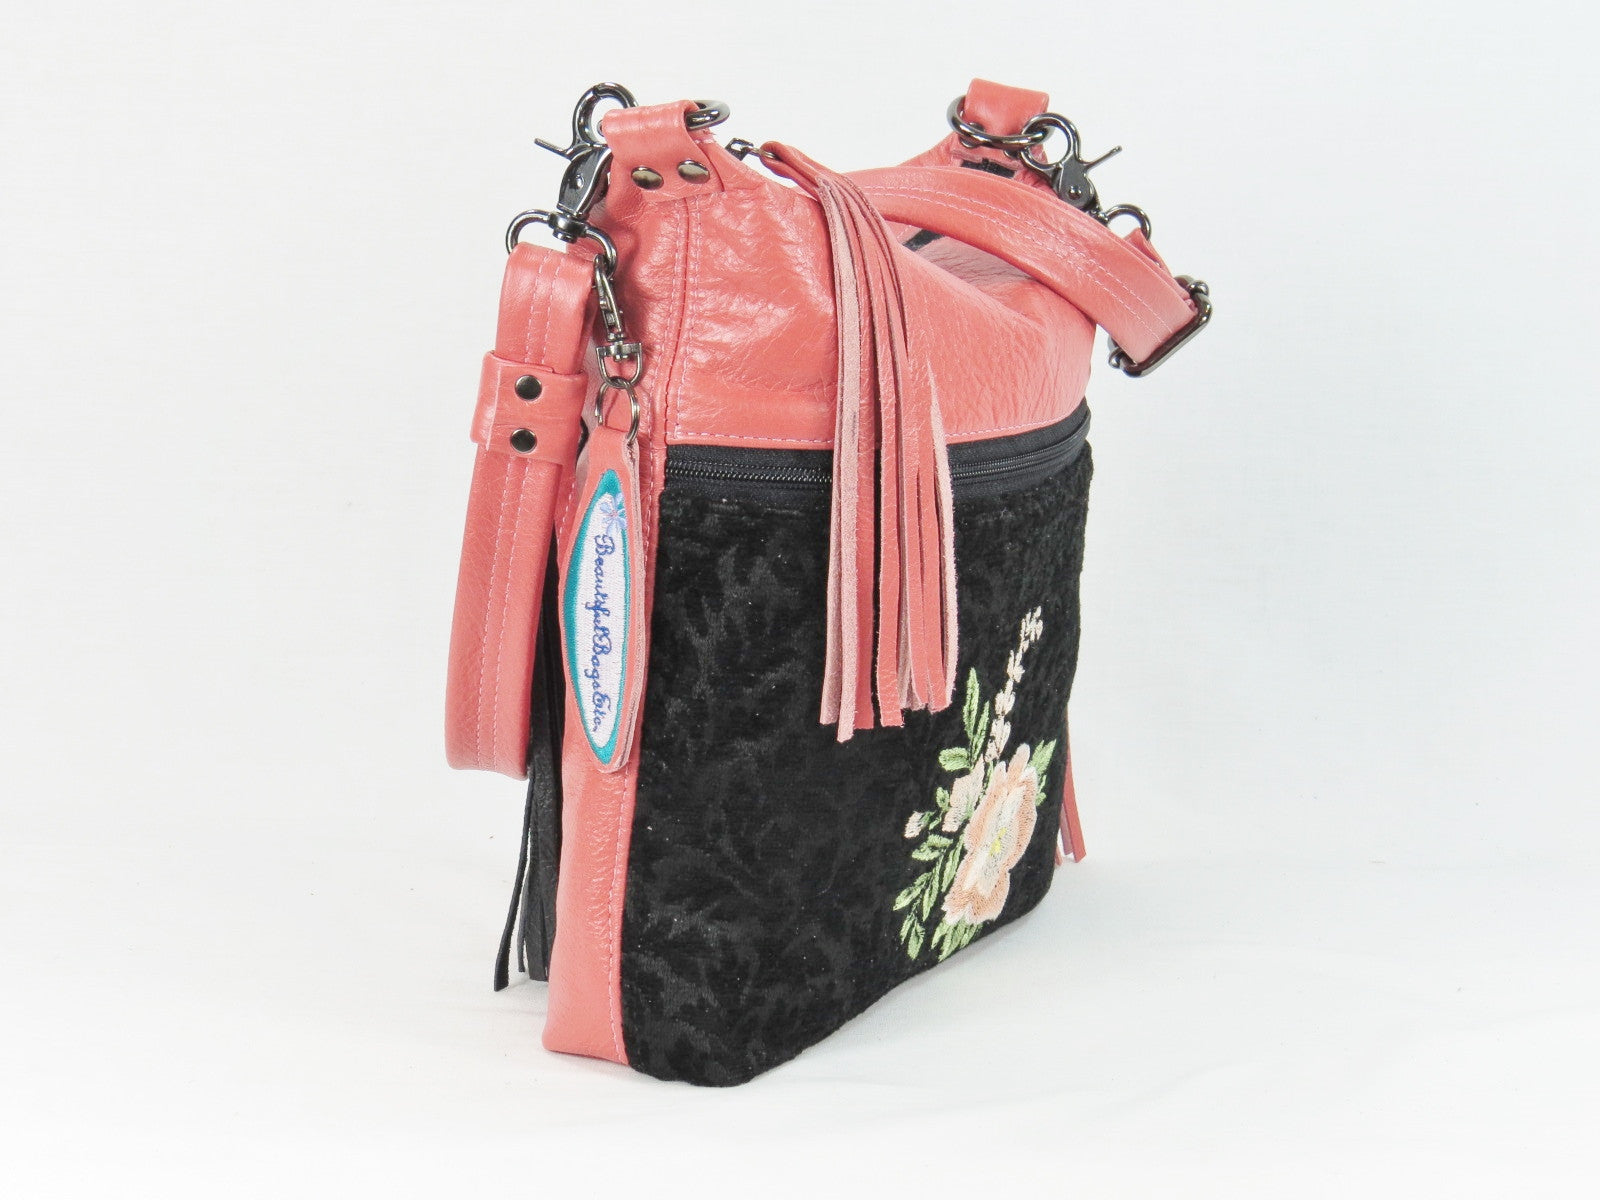 Black and Coral Leather Cross Body Bag Asian Floral Embroidery top zipper closure